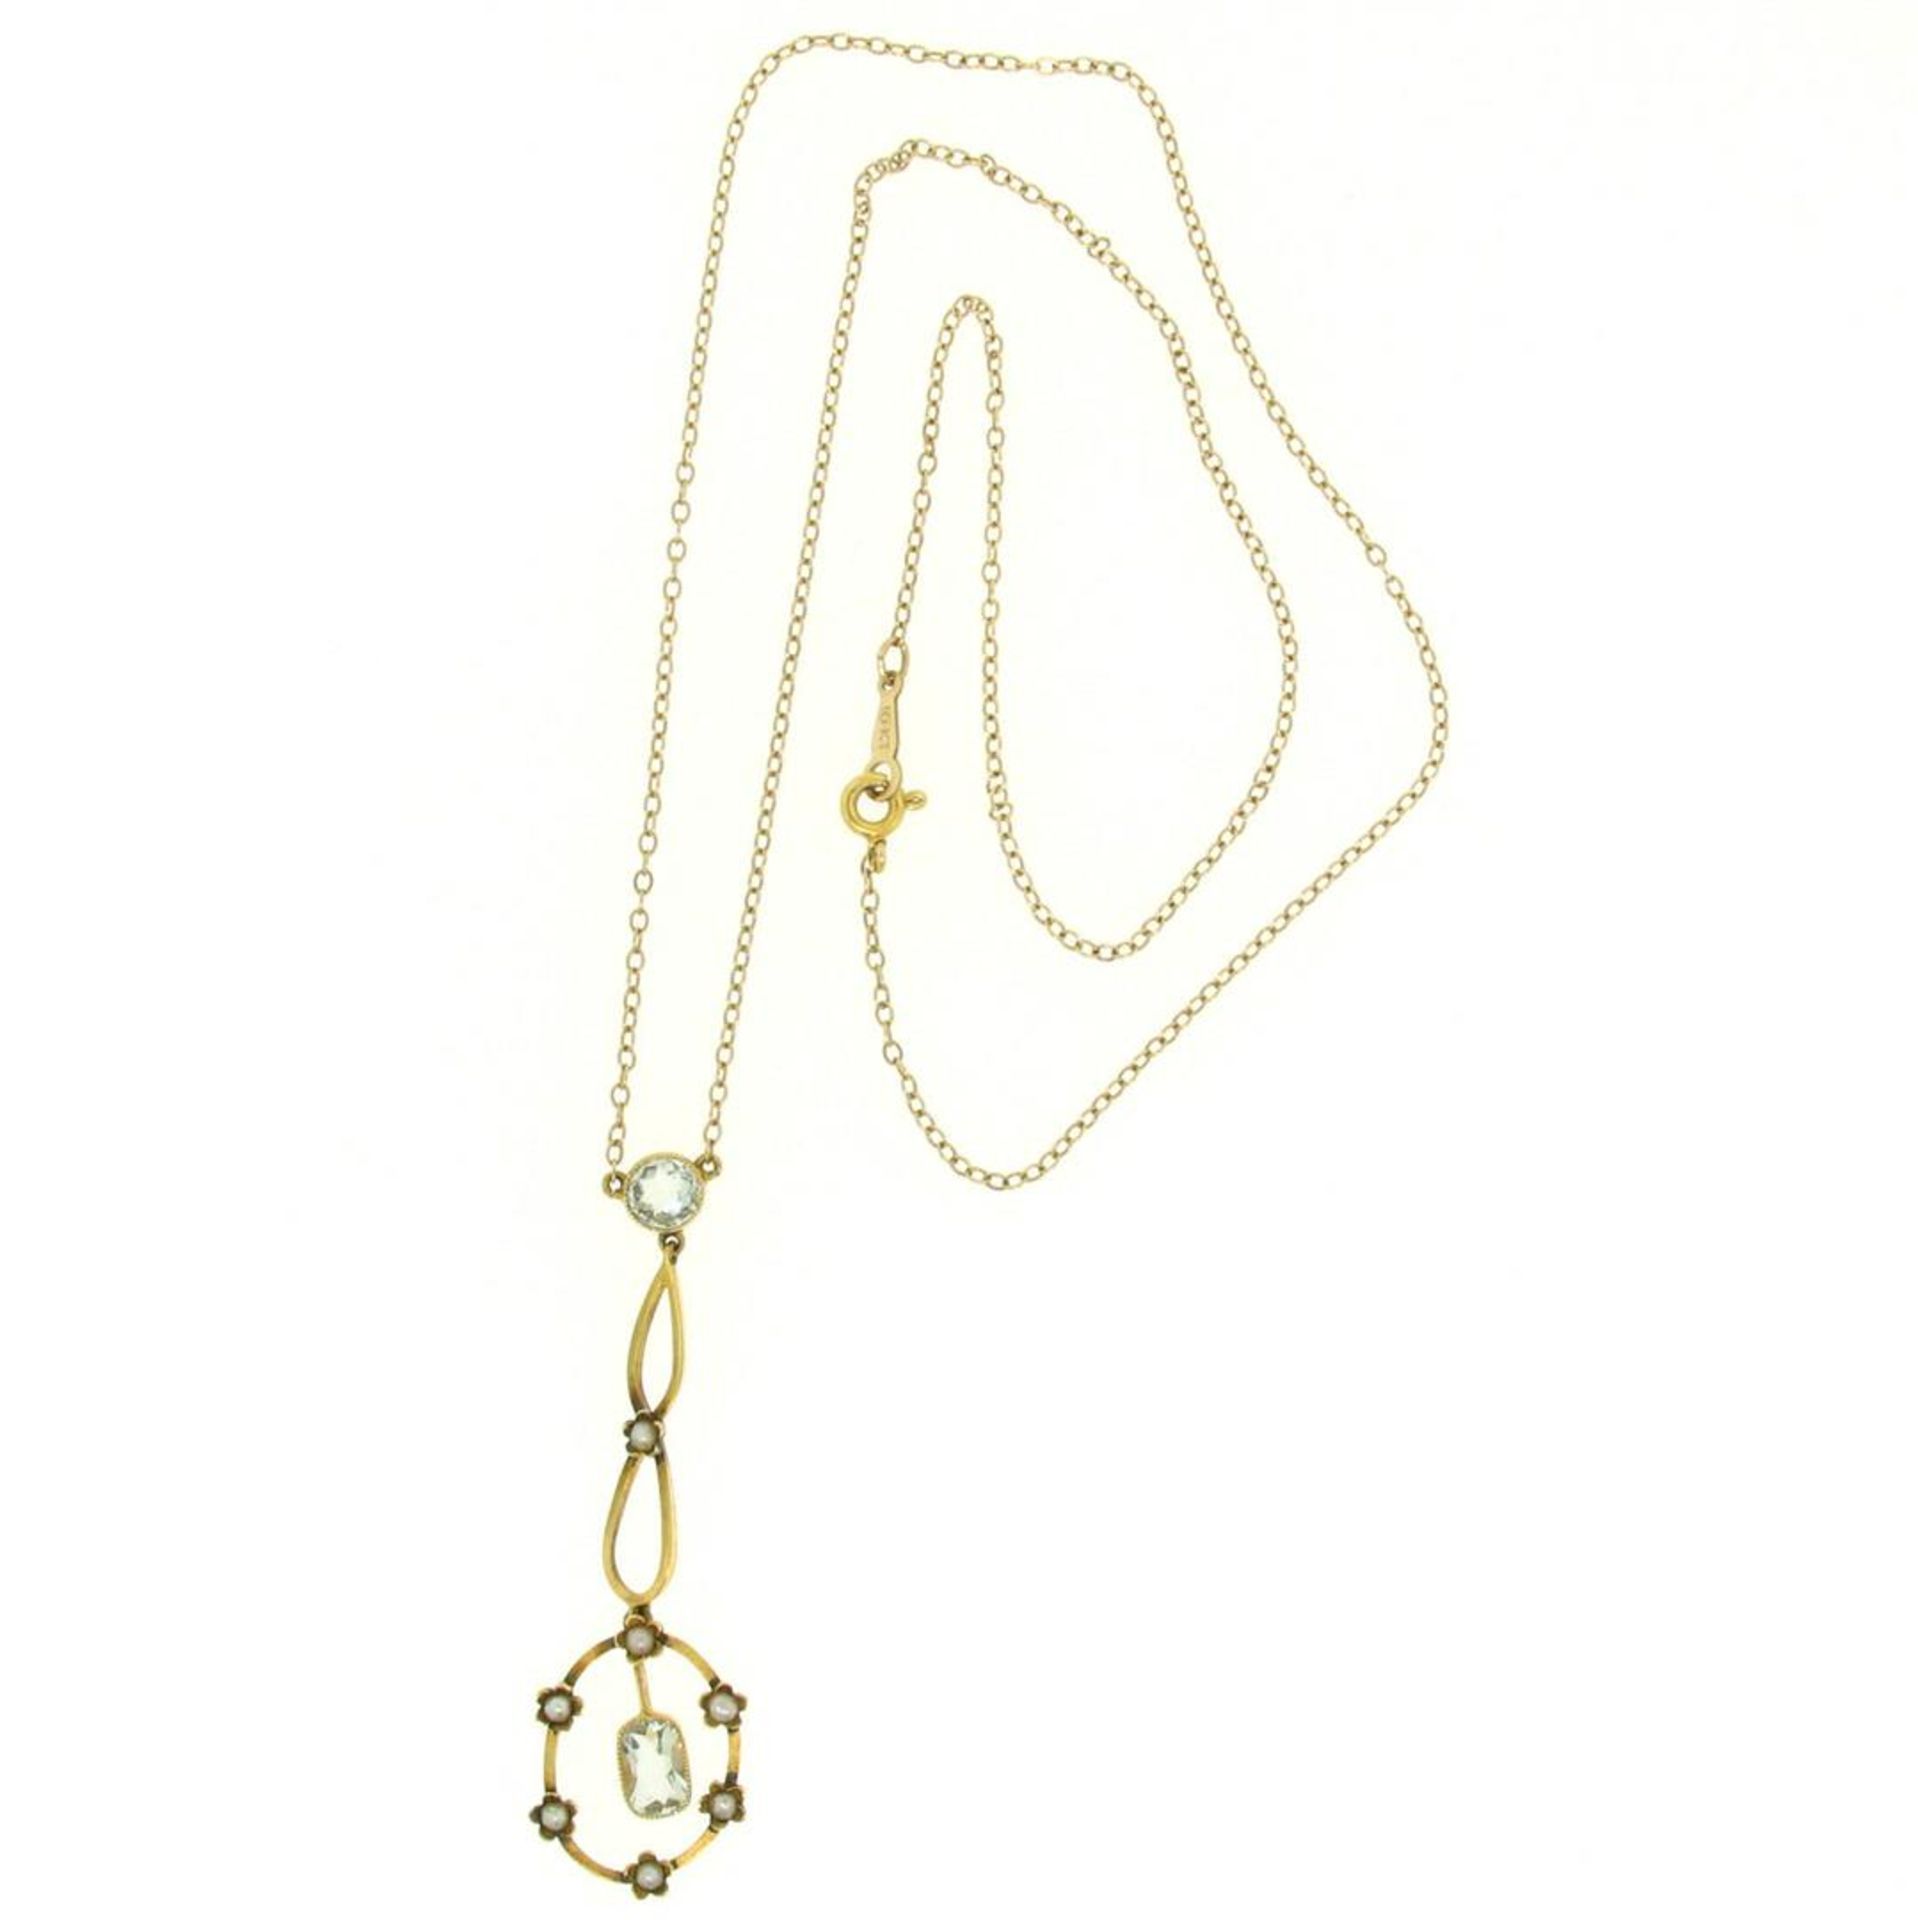 Antique Victorian 10k Yellow Gold Aquamarine Seed Pearl Dangle Pendant Necklace - Image 9 of 9